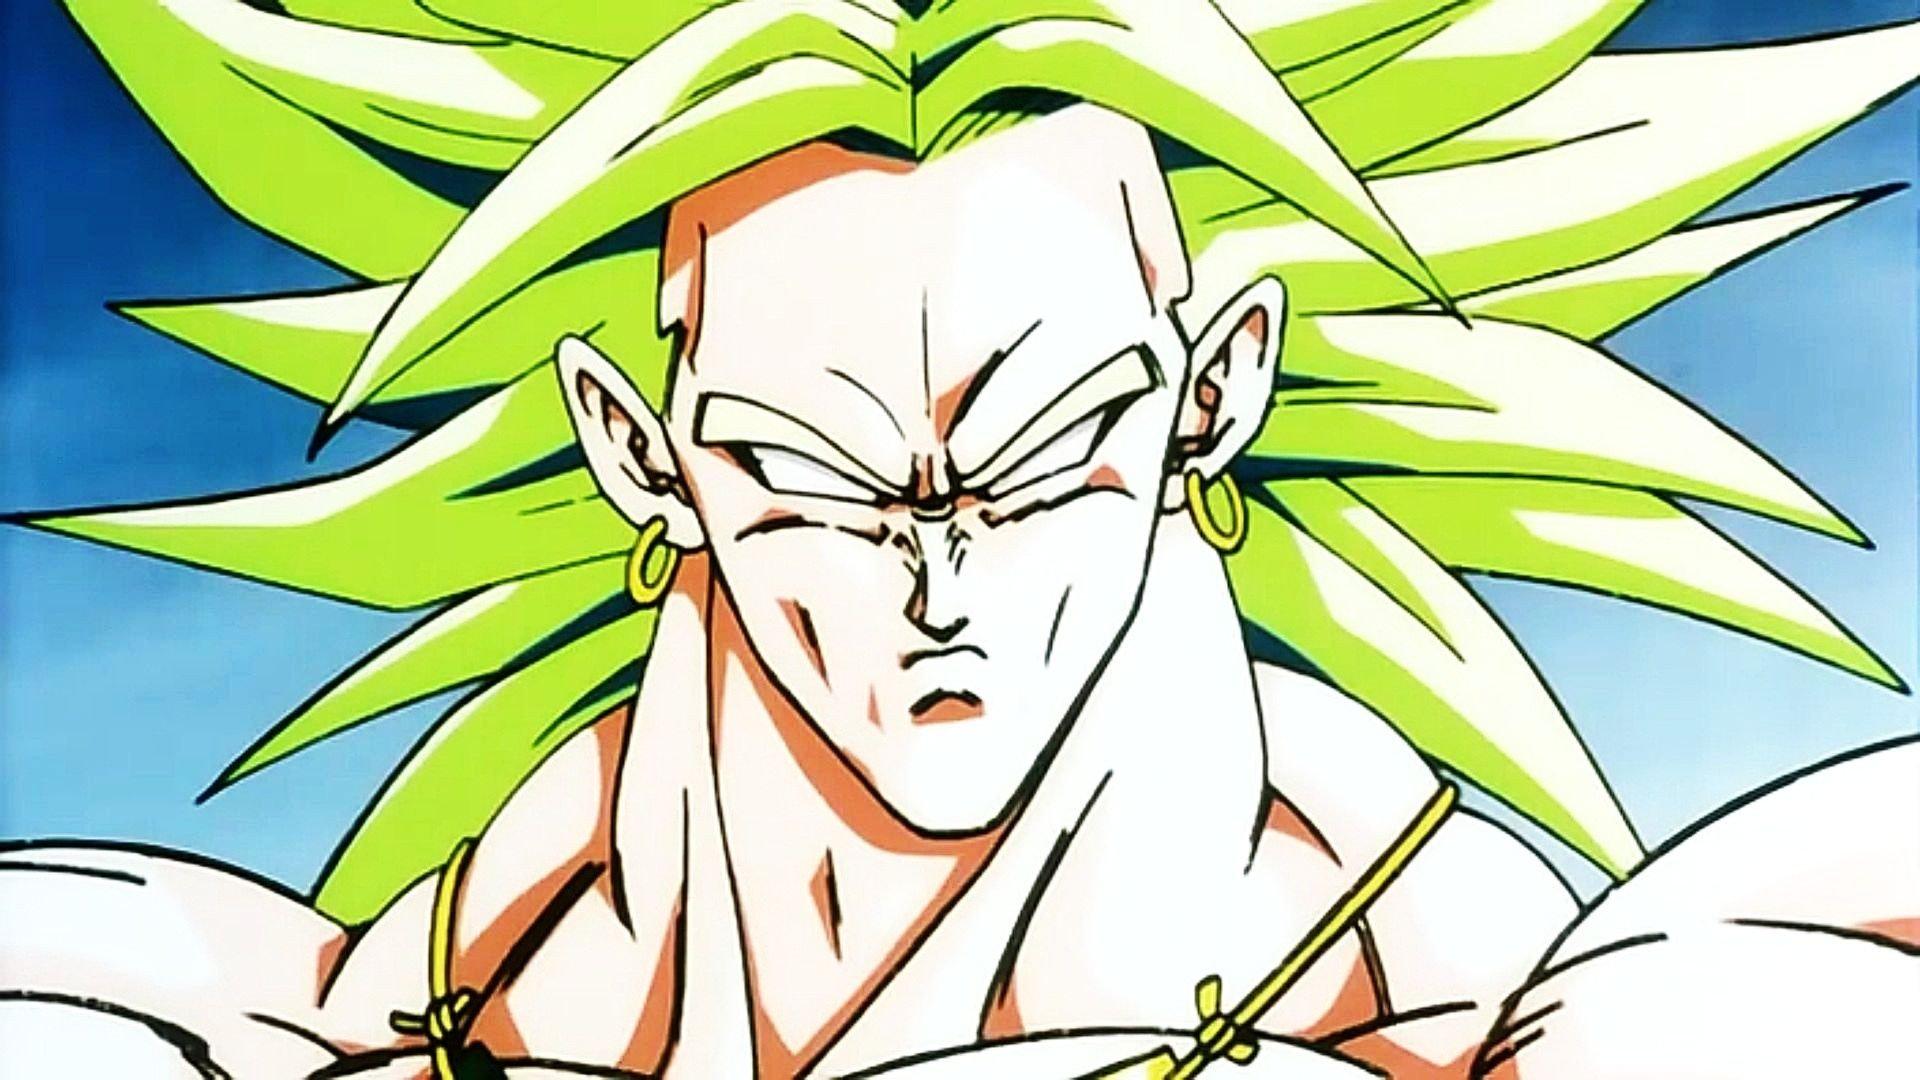 Free download Dragon Ball Z Broly wallpaper 1920x1080 301395 WallpaperUP [1920x1080] for your Desktop, Mobile & Tablet. Explore DBZ Broly Wallpaper. Broly Wallpaper, Best Goku Wallpaper, DBZ Goku Wallpaper